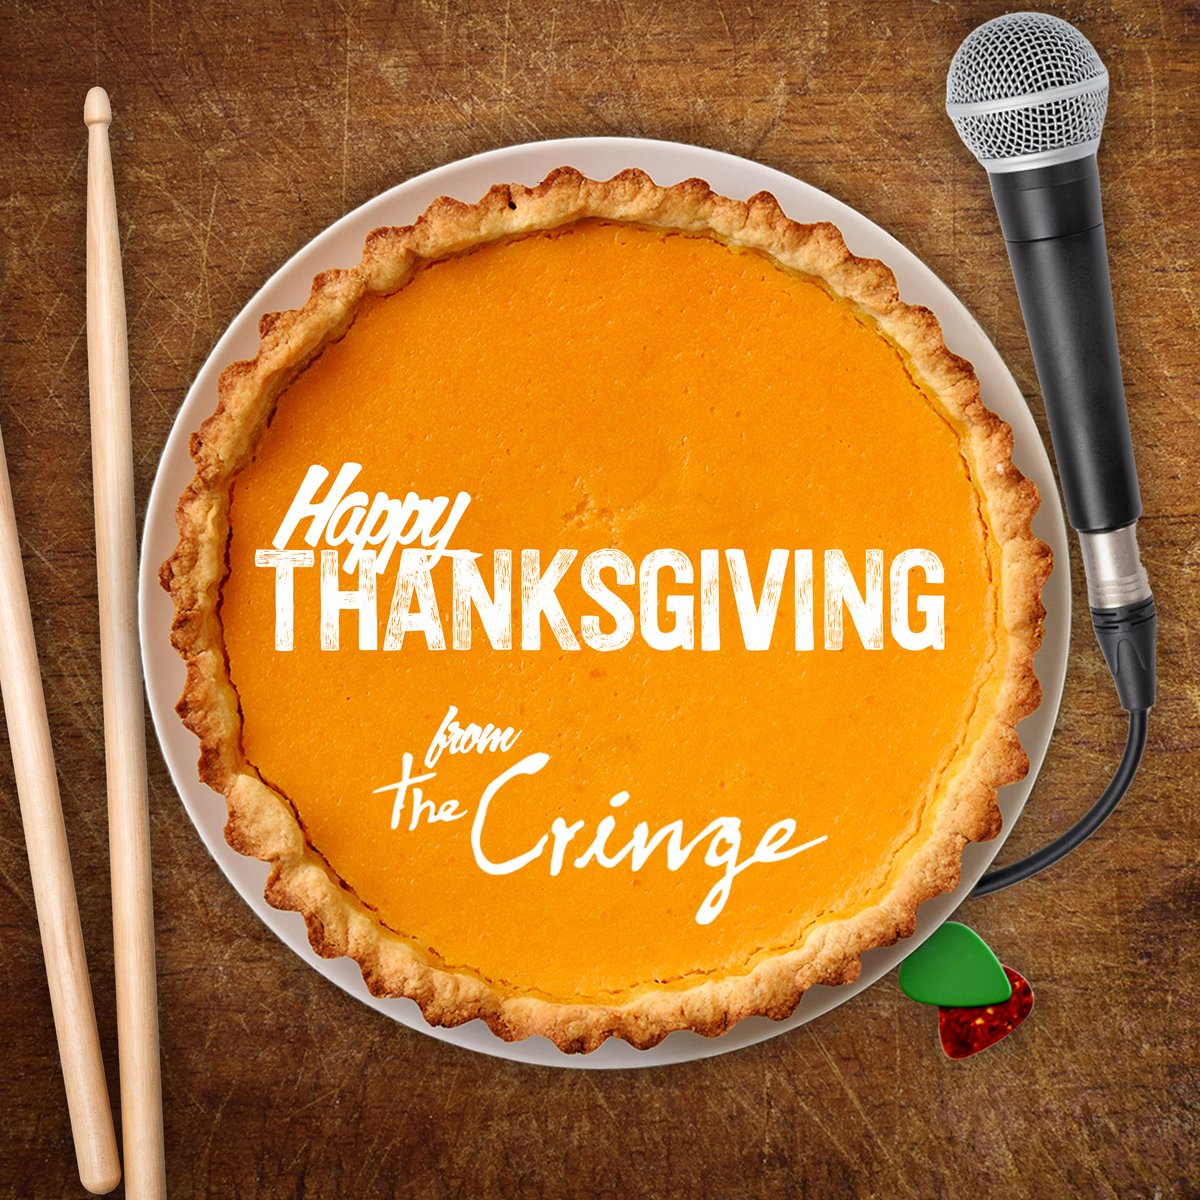 Wishing all of our fans and friends a very Happy Thanksgiving!